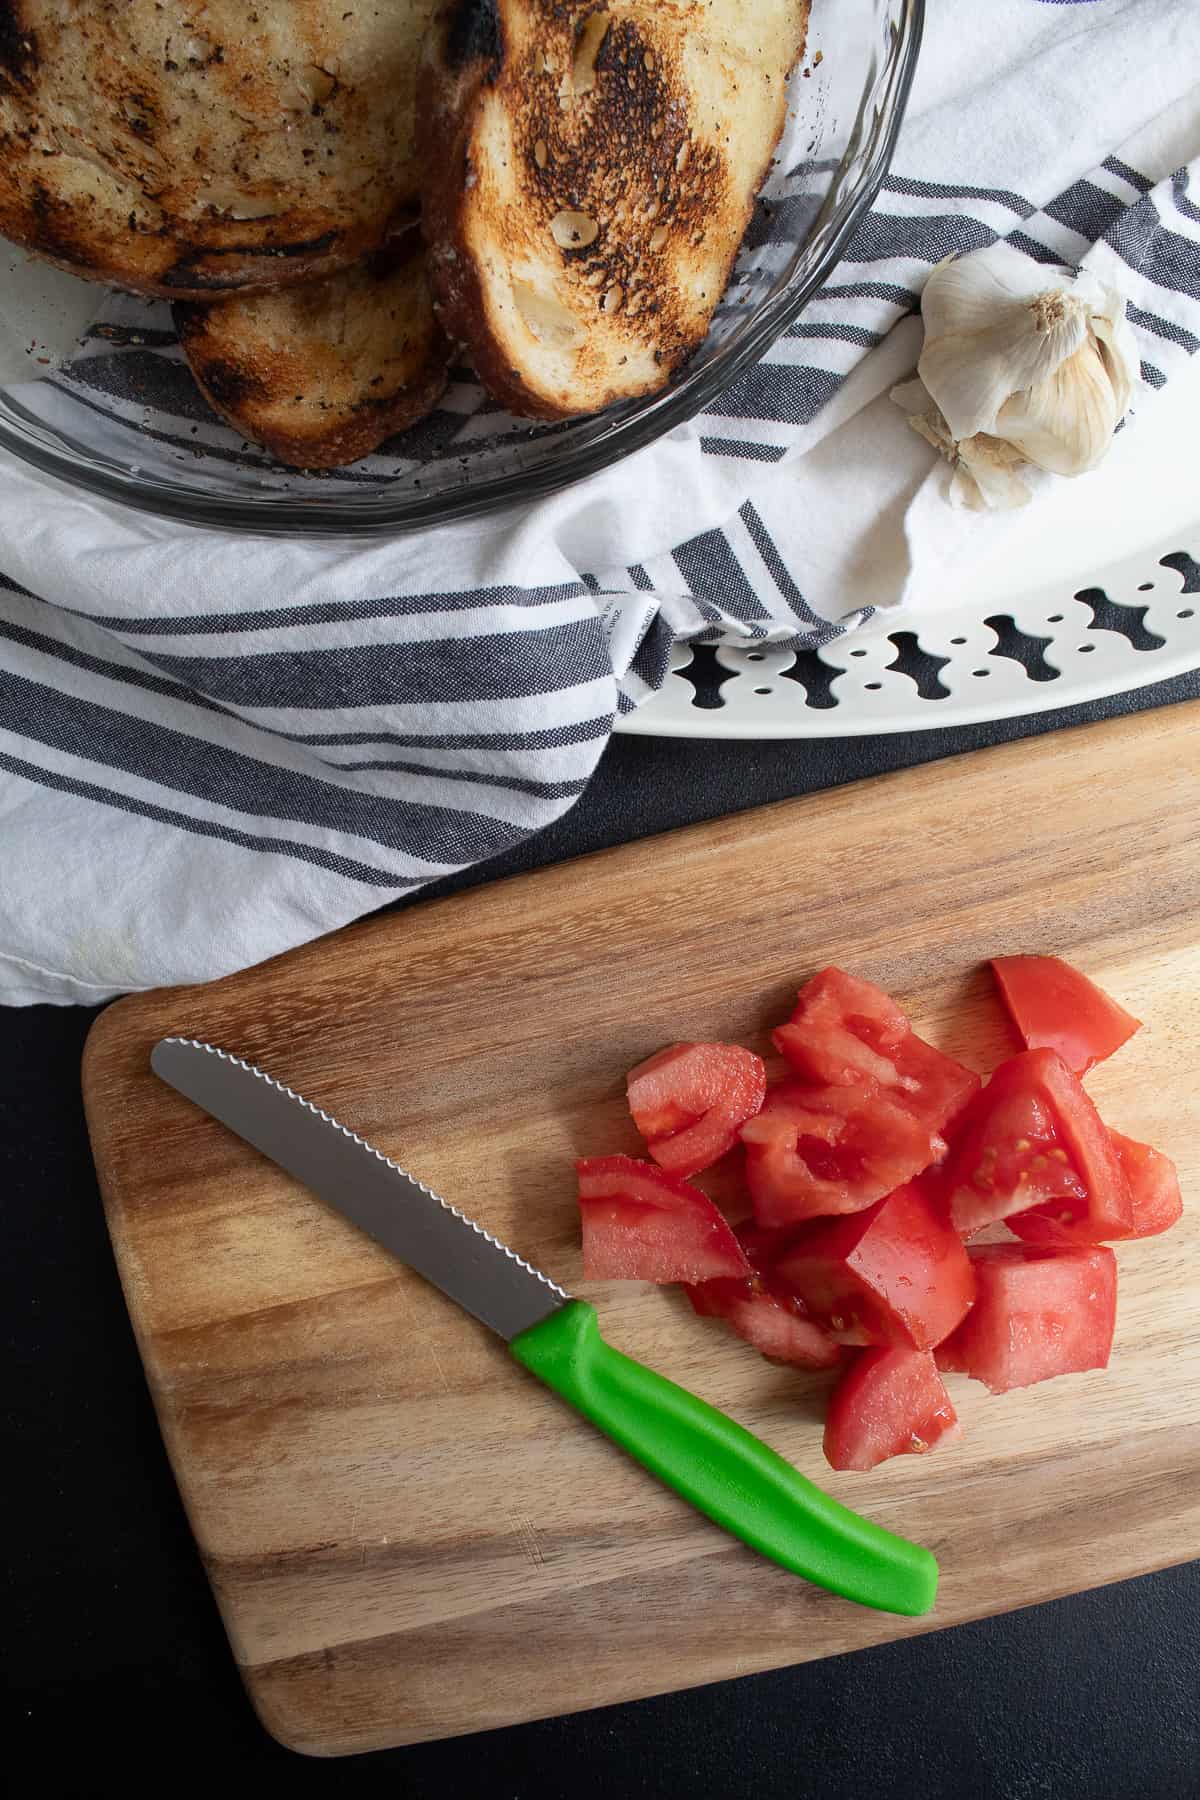 Tomatoes are roughly chopped on a wooden cutting board with a green-handled knife.